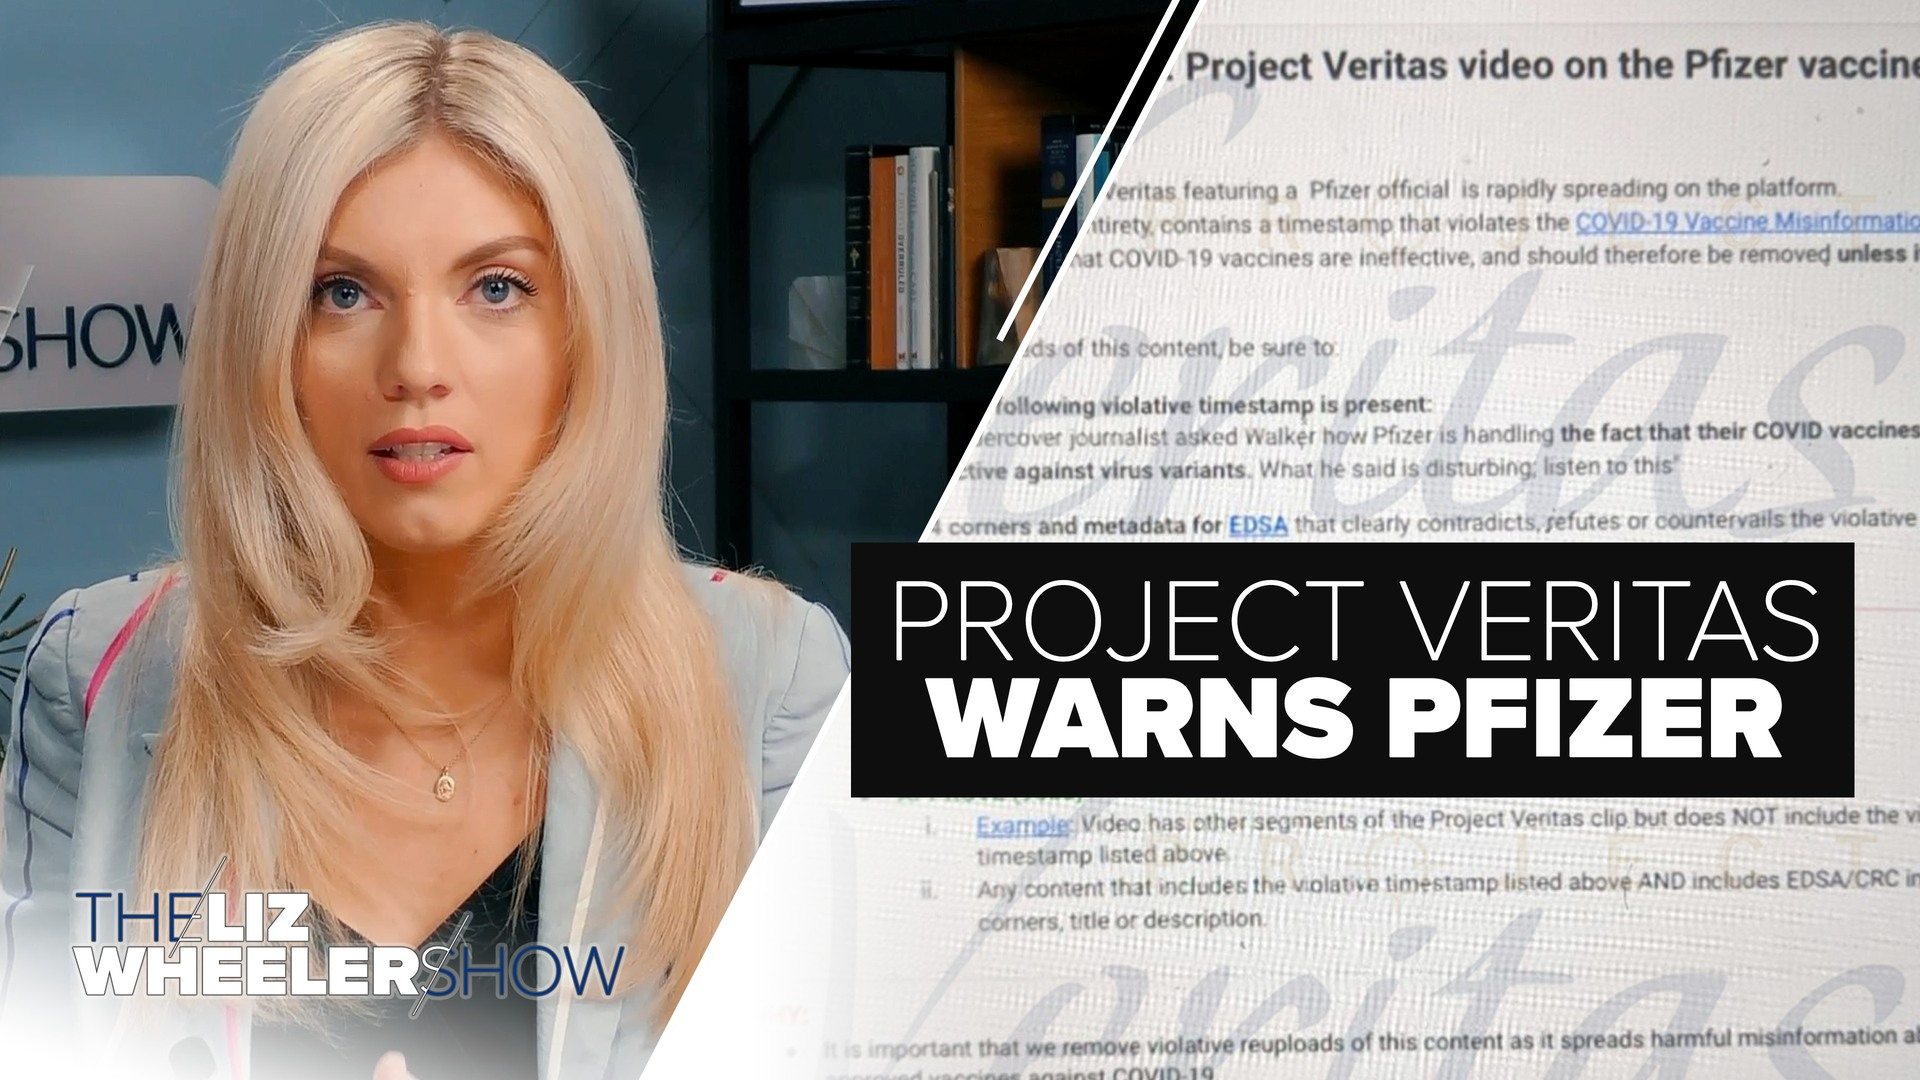 Project Veritas publishes an internal warning from YouTube about the Pfizer expose